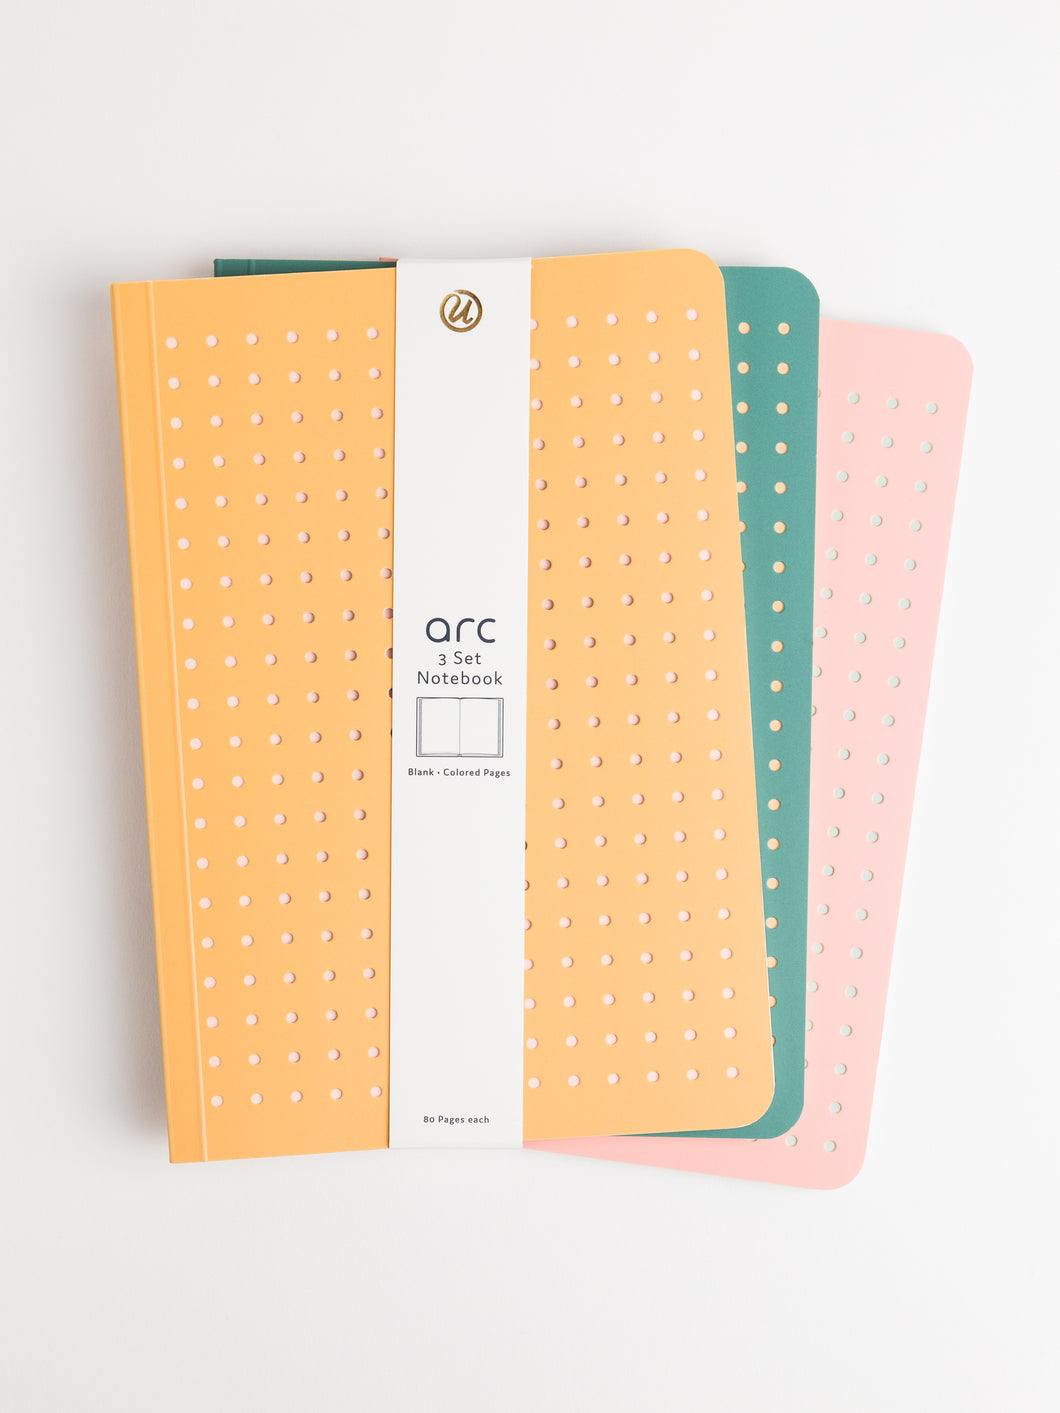 3 different colored perforated notebooks bound by a white packaging strap